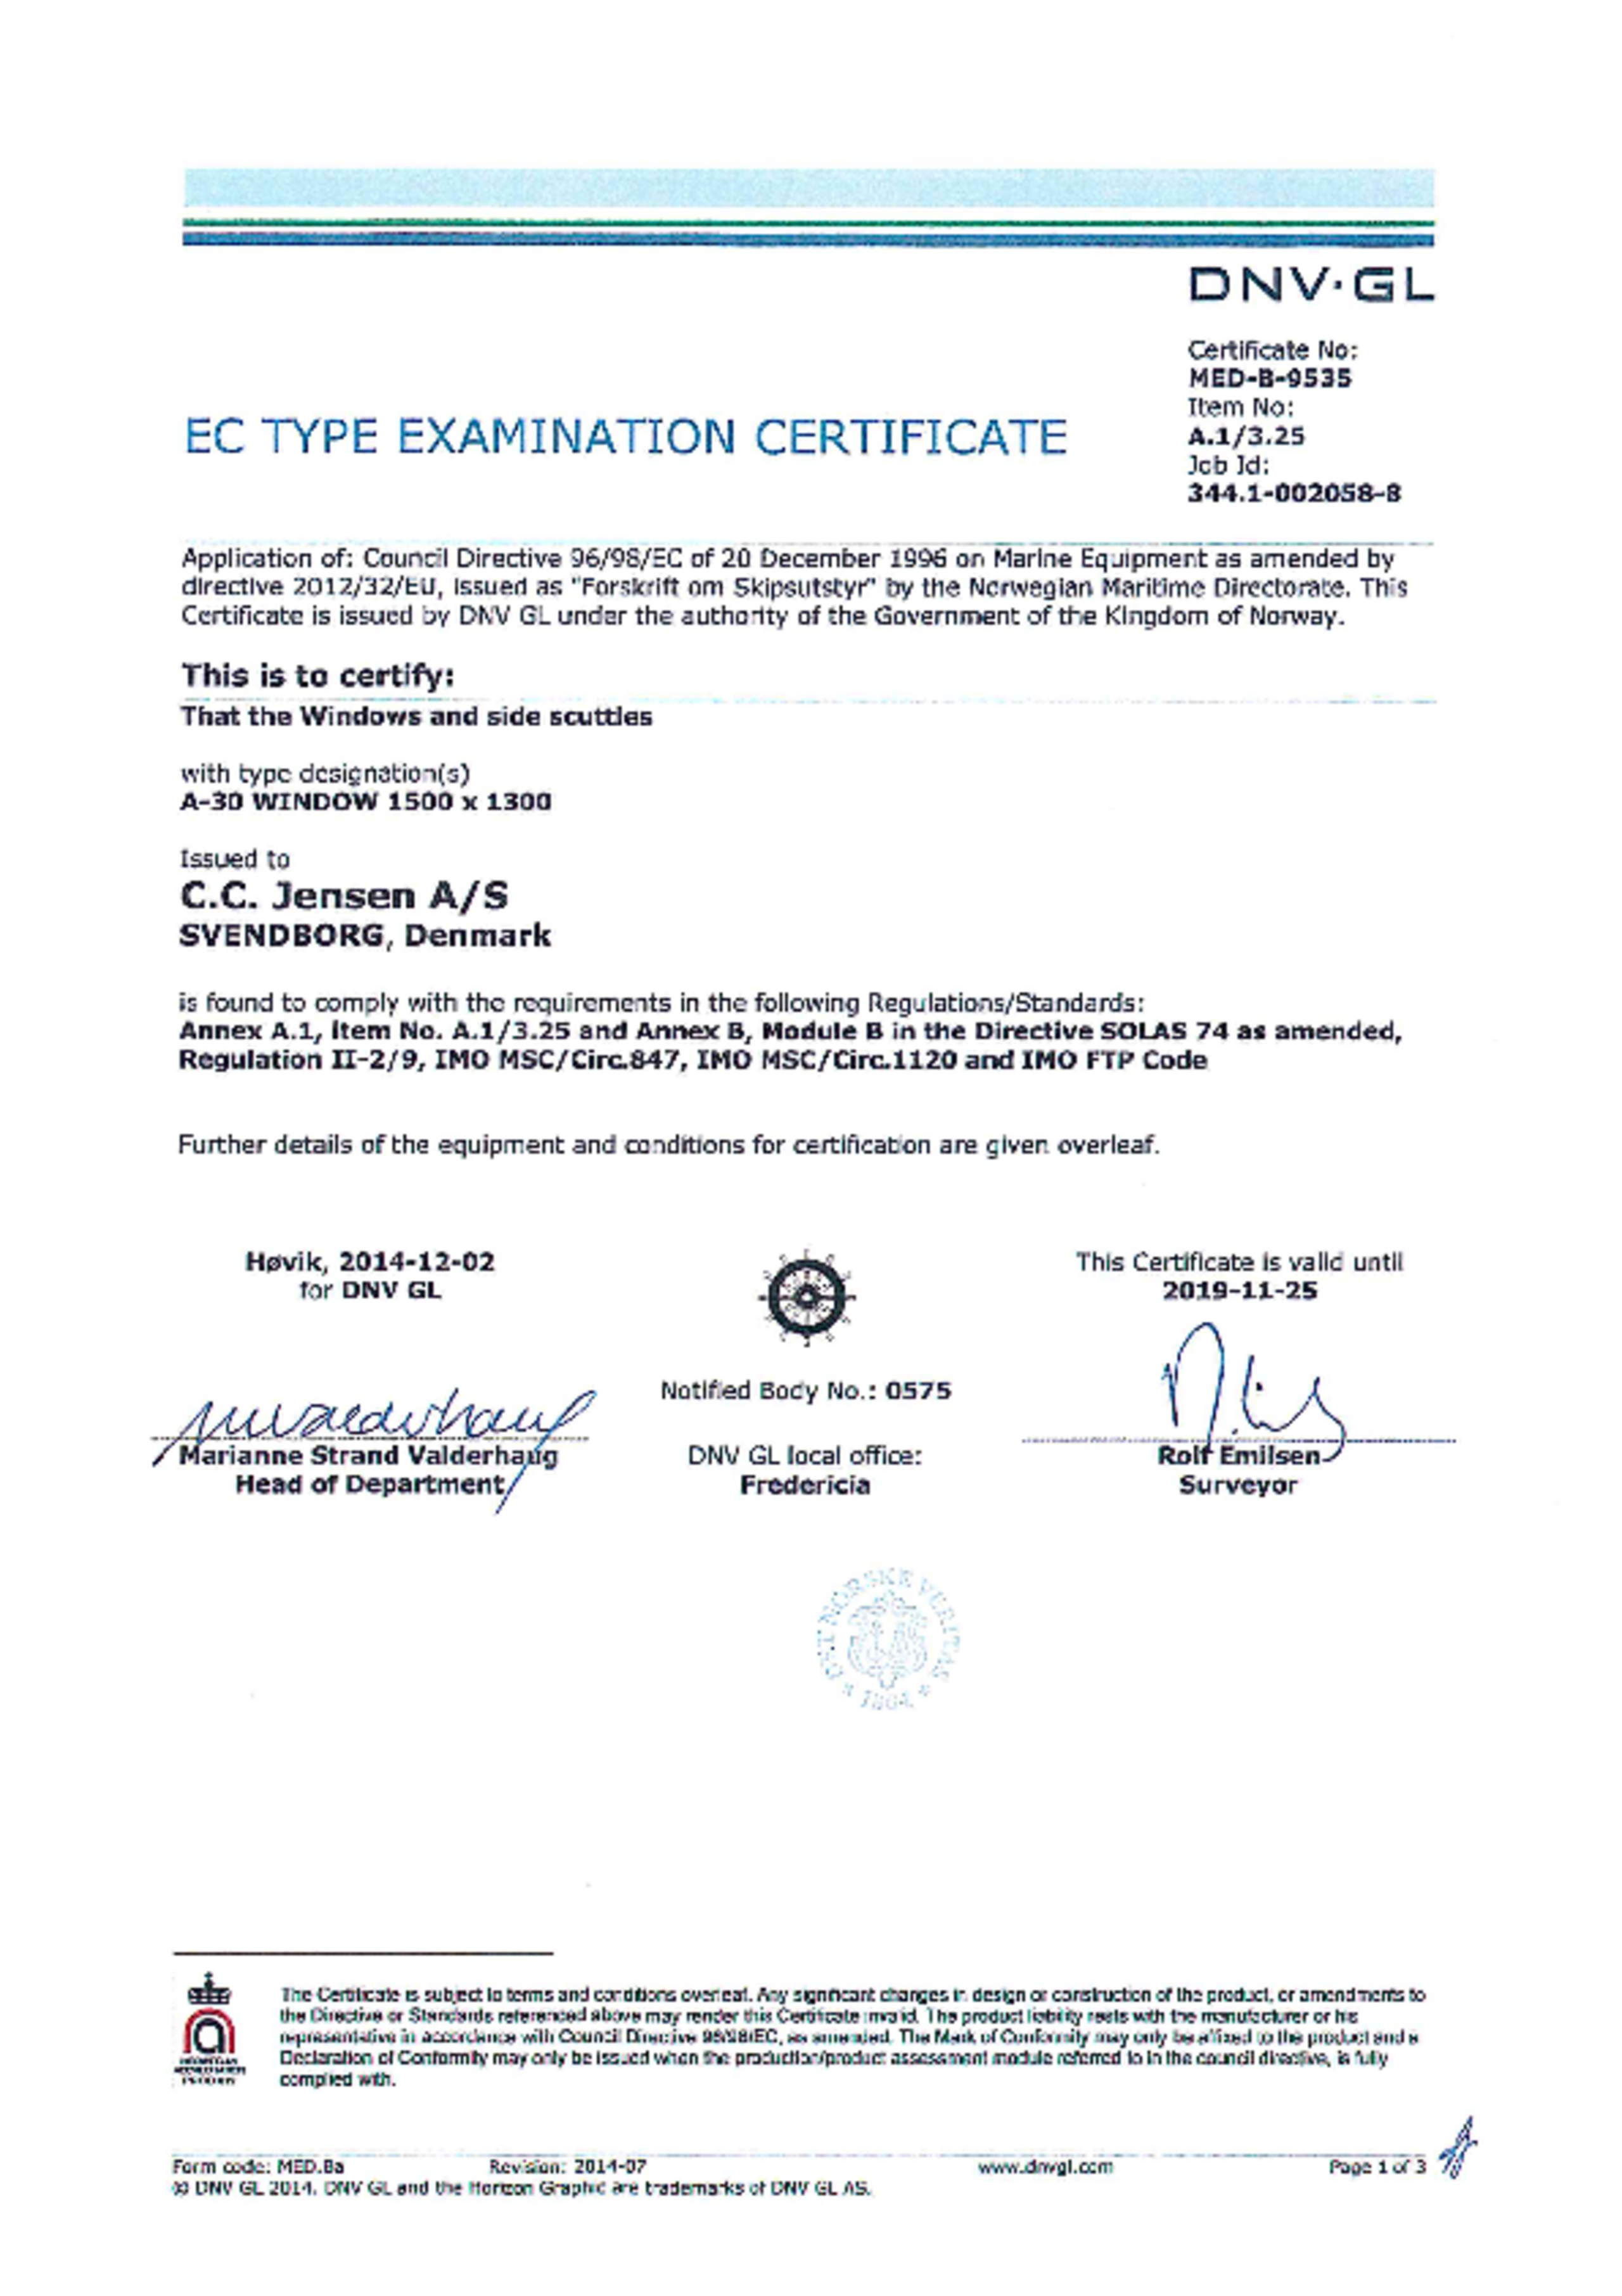 EC type examination certificate, 2014 by DNV-GL